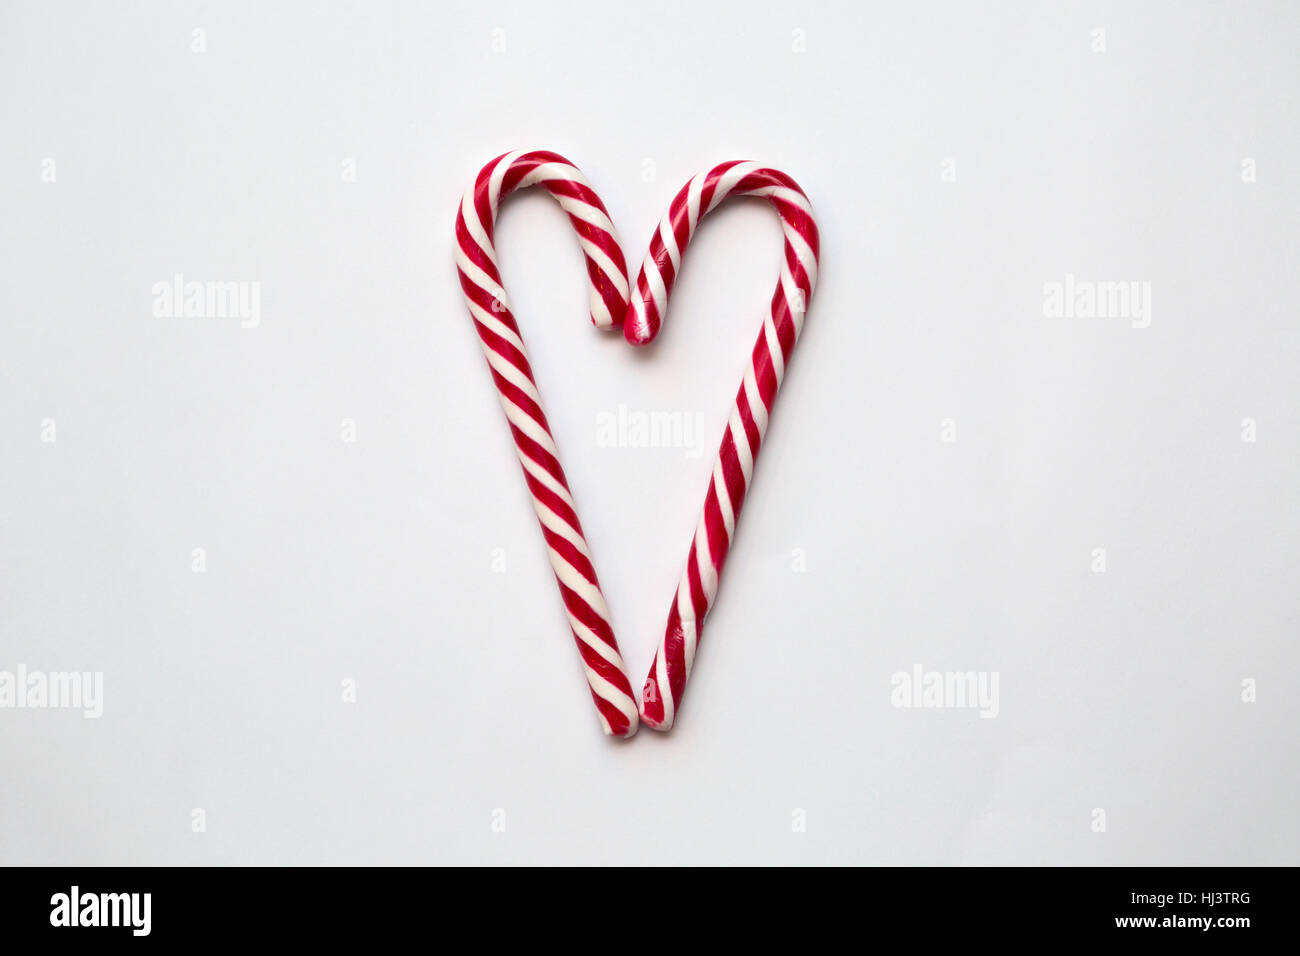 Two Candy Canes Making a Heart Stock Photo